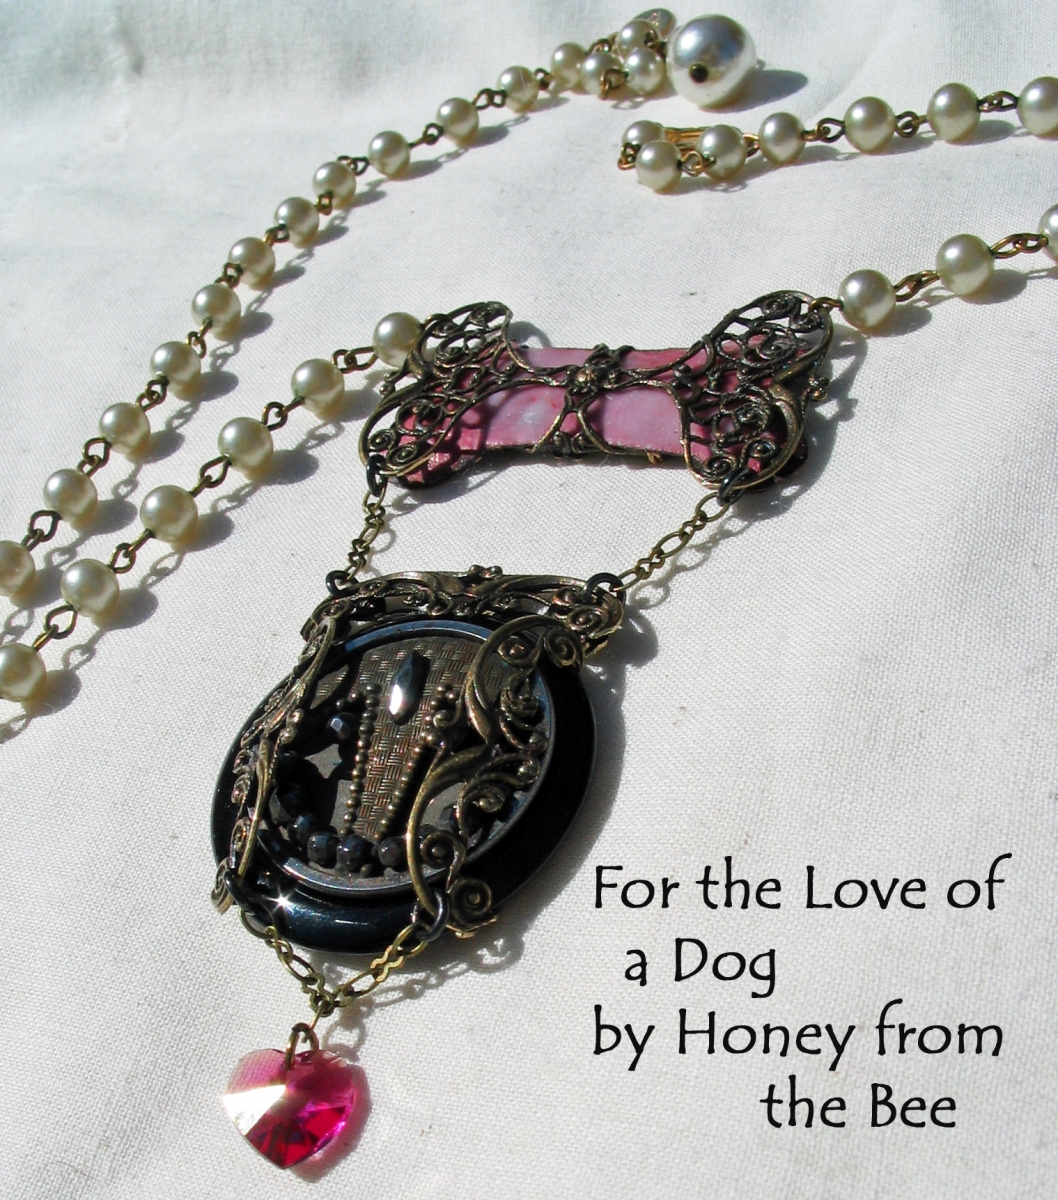 Dog Mourning necklace by Honey from the Bee